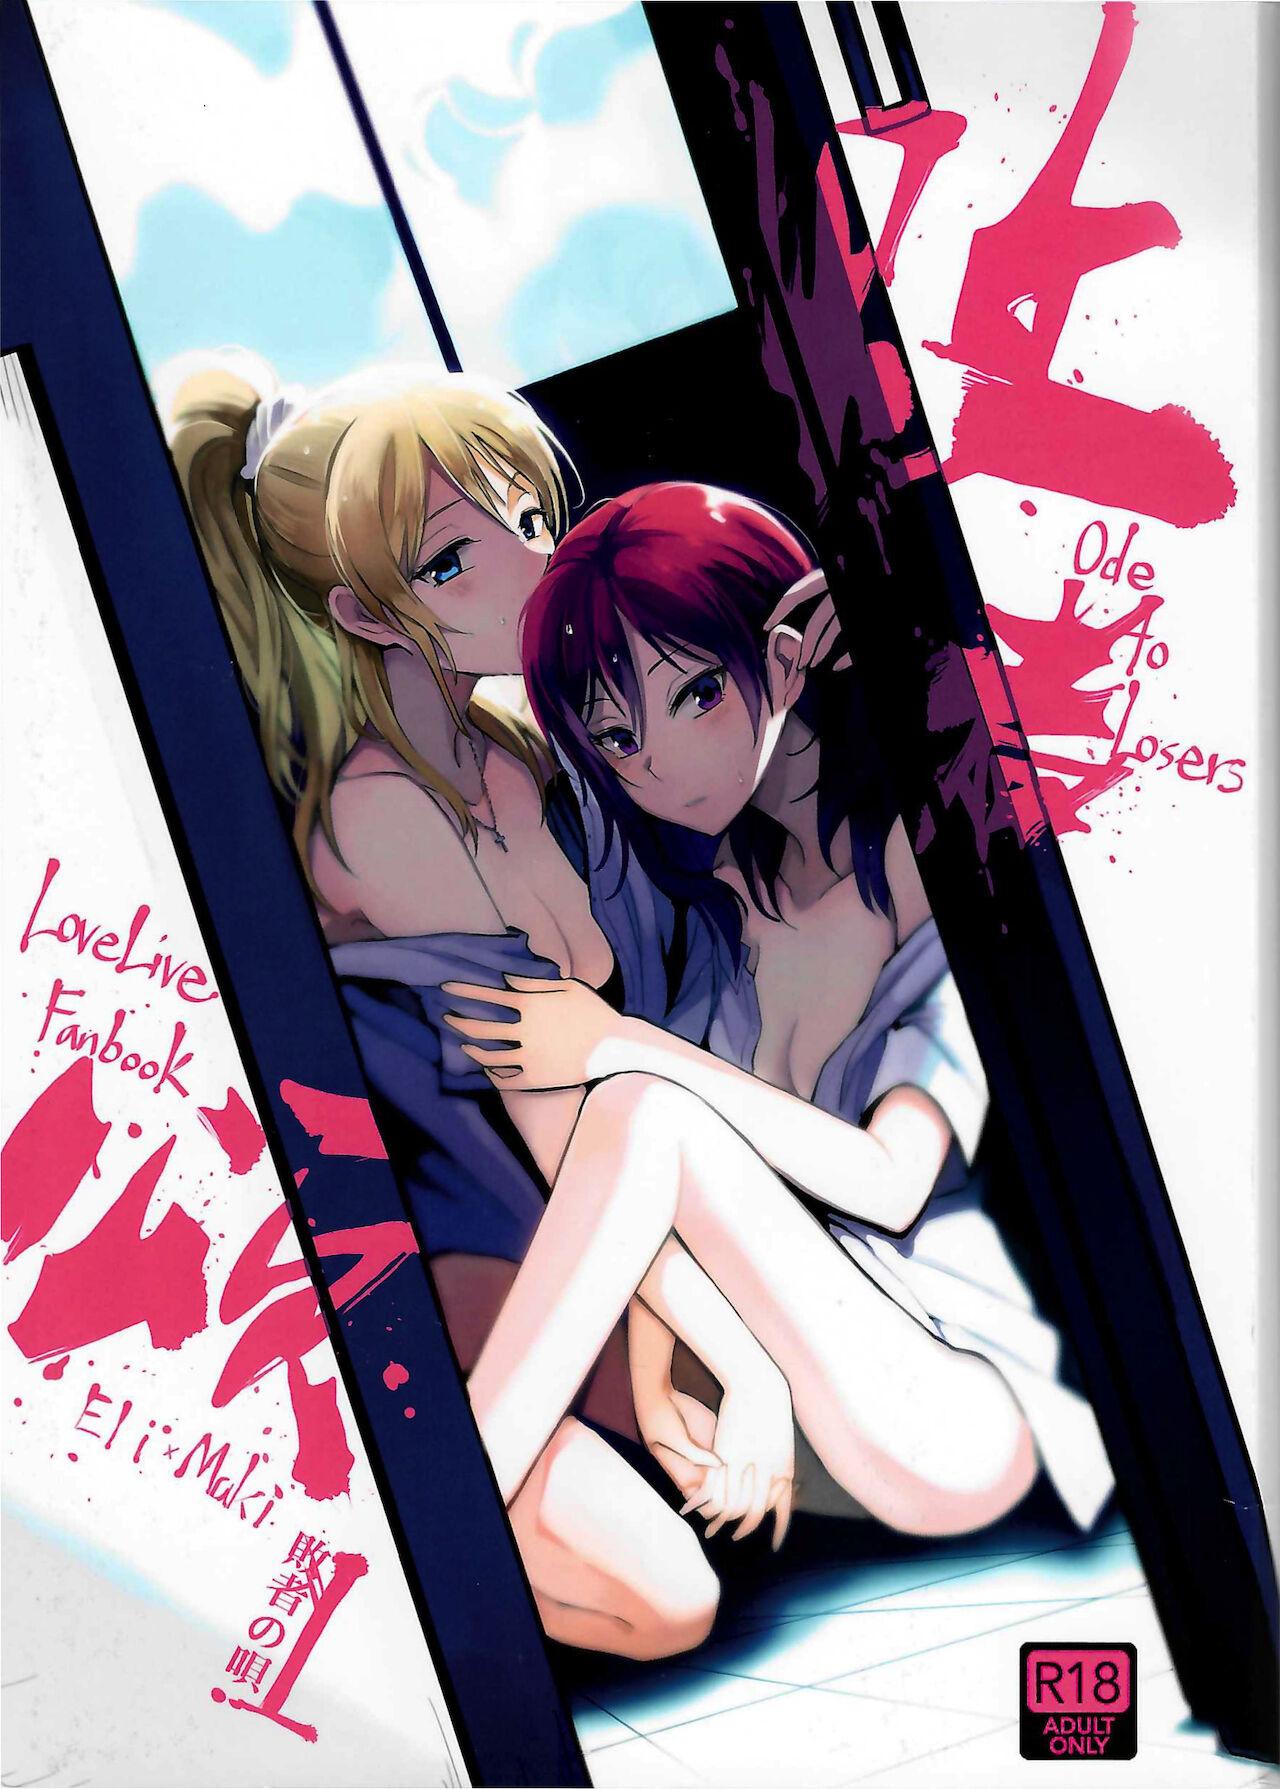 Hidden Cam Ode to Losers - Love live Gay Shop - Picture 1